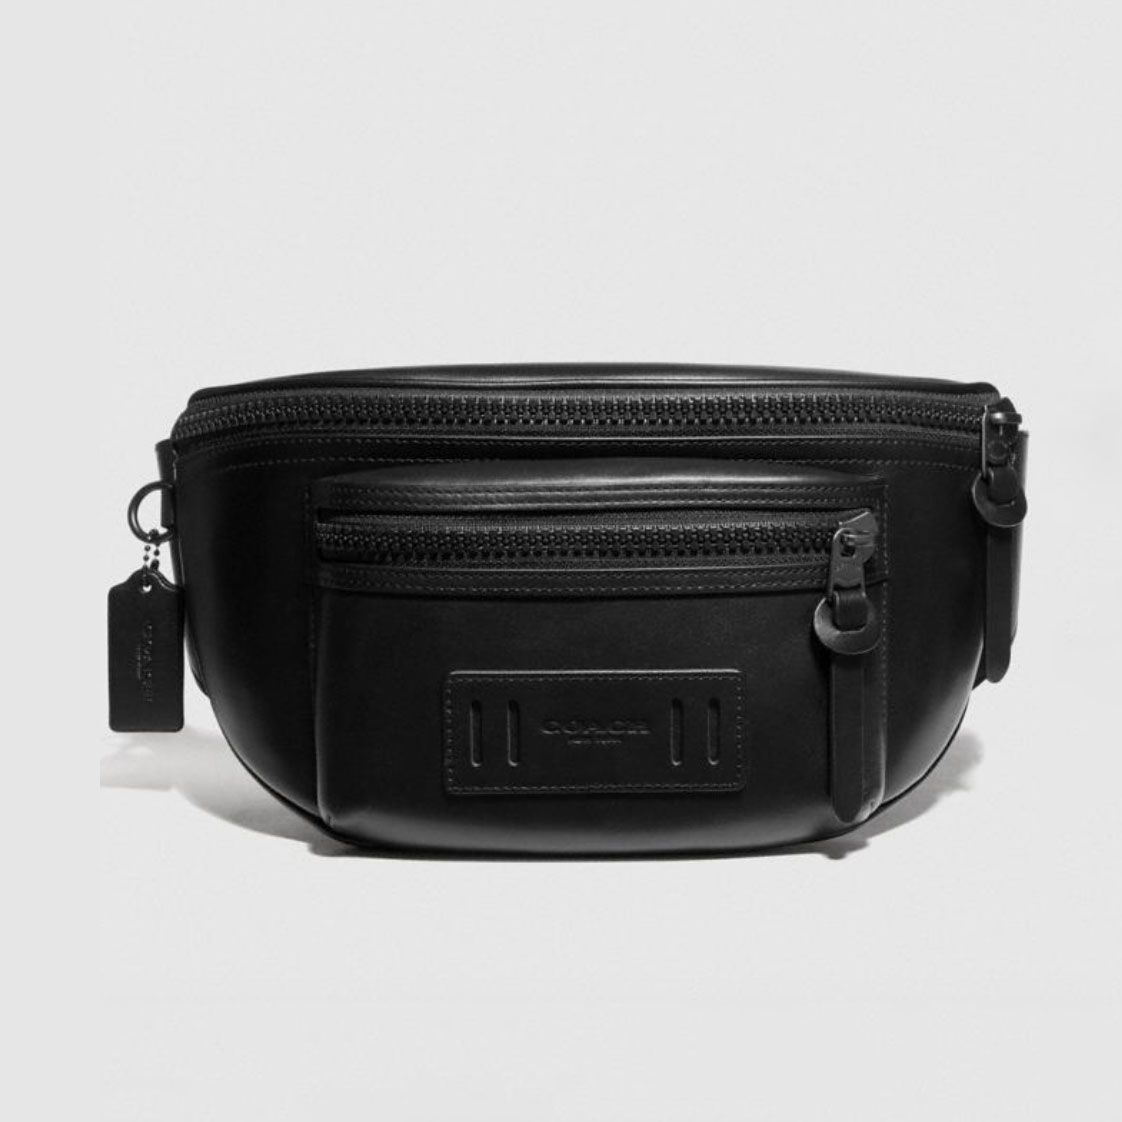 22 Best Fanny Packs 2020 | The 